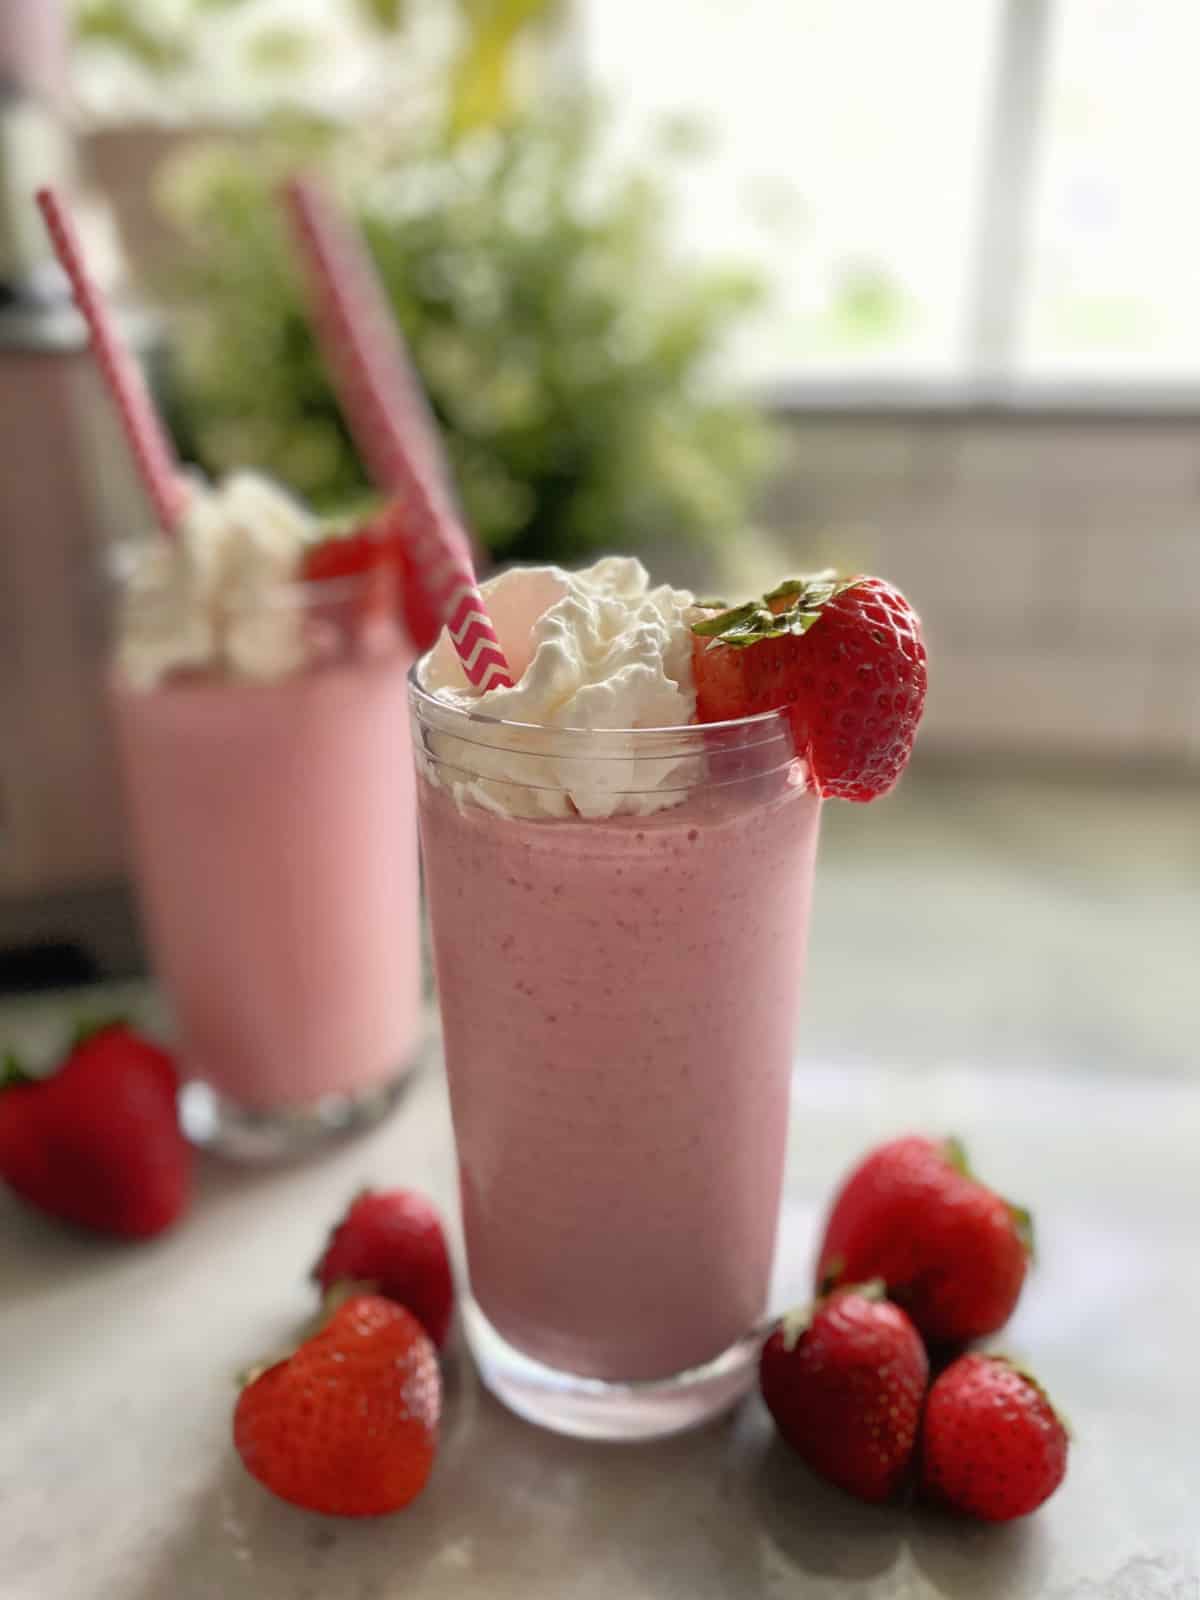 Clear glass of strawberry milkshake with whipped cream and a fresh strawberry on the rim. 